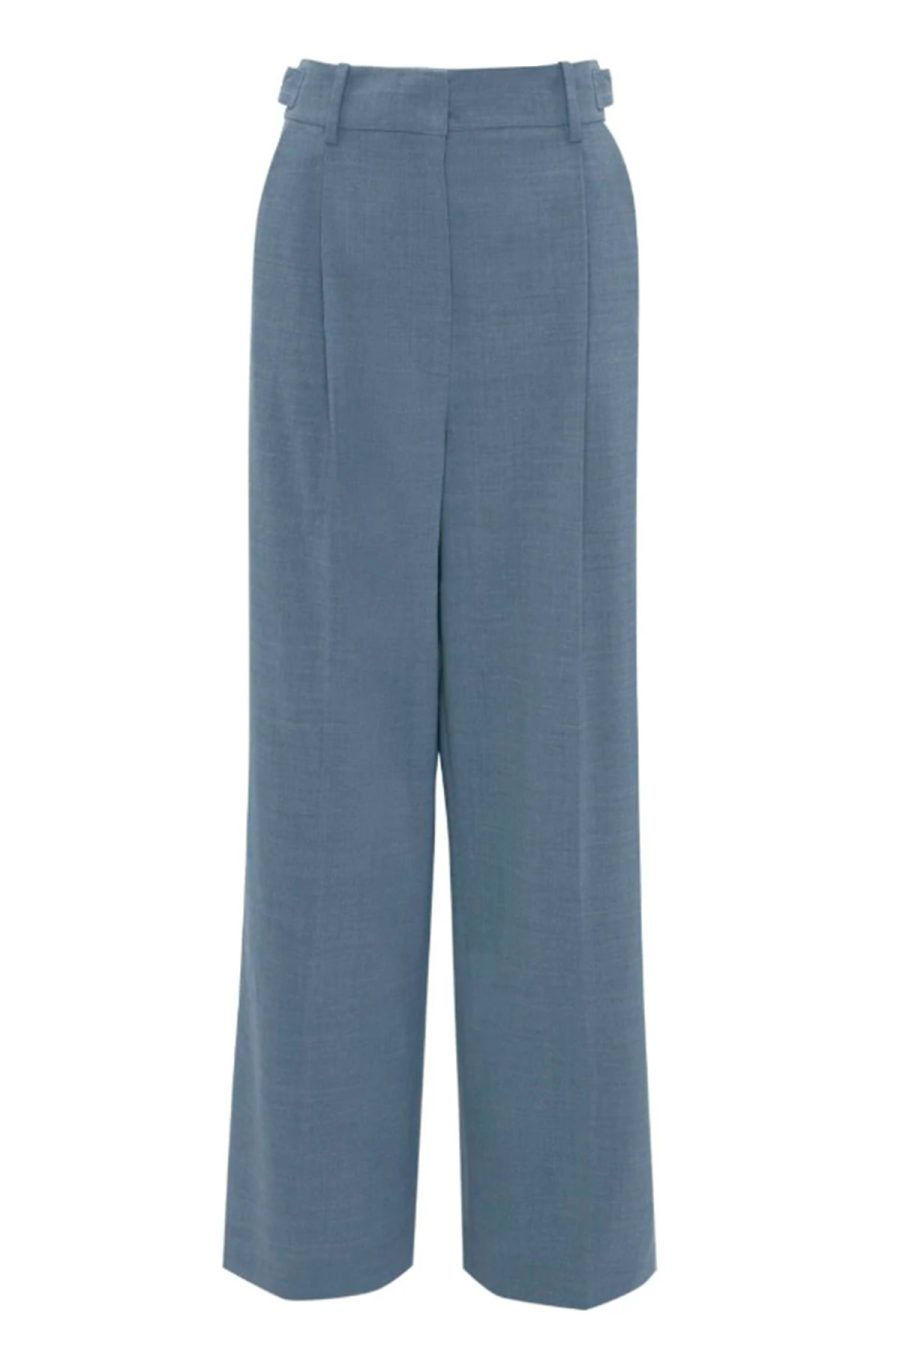 JW ANDERSON Trousers